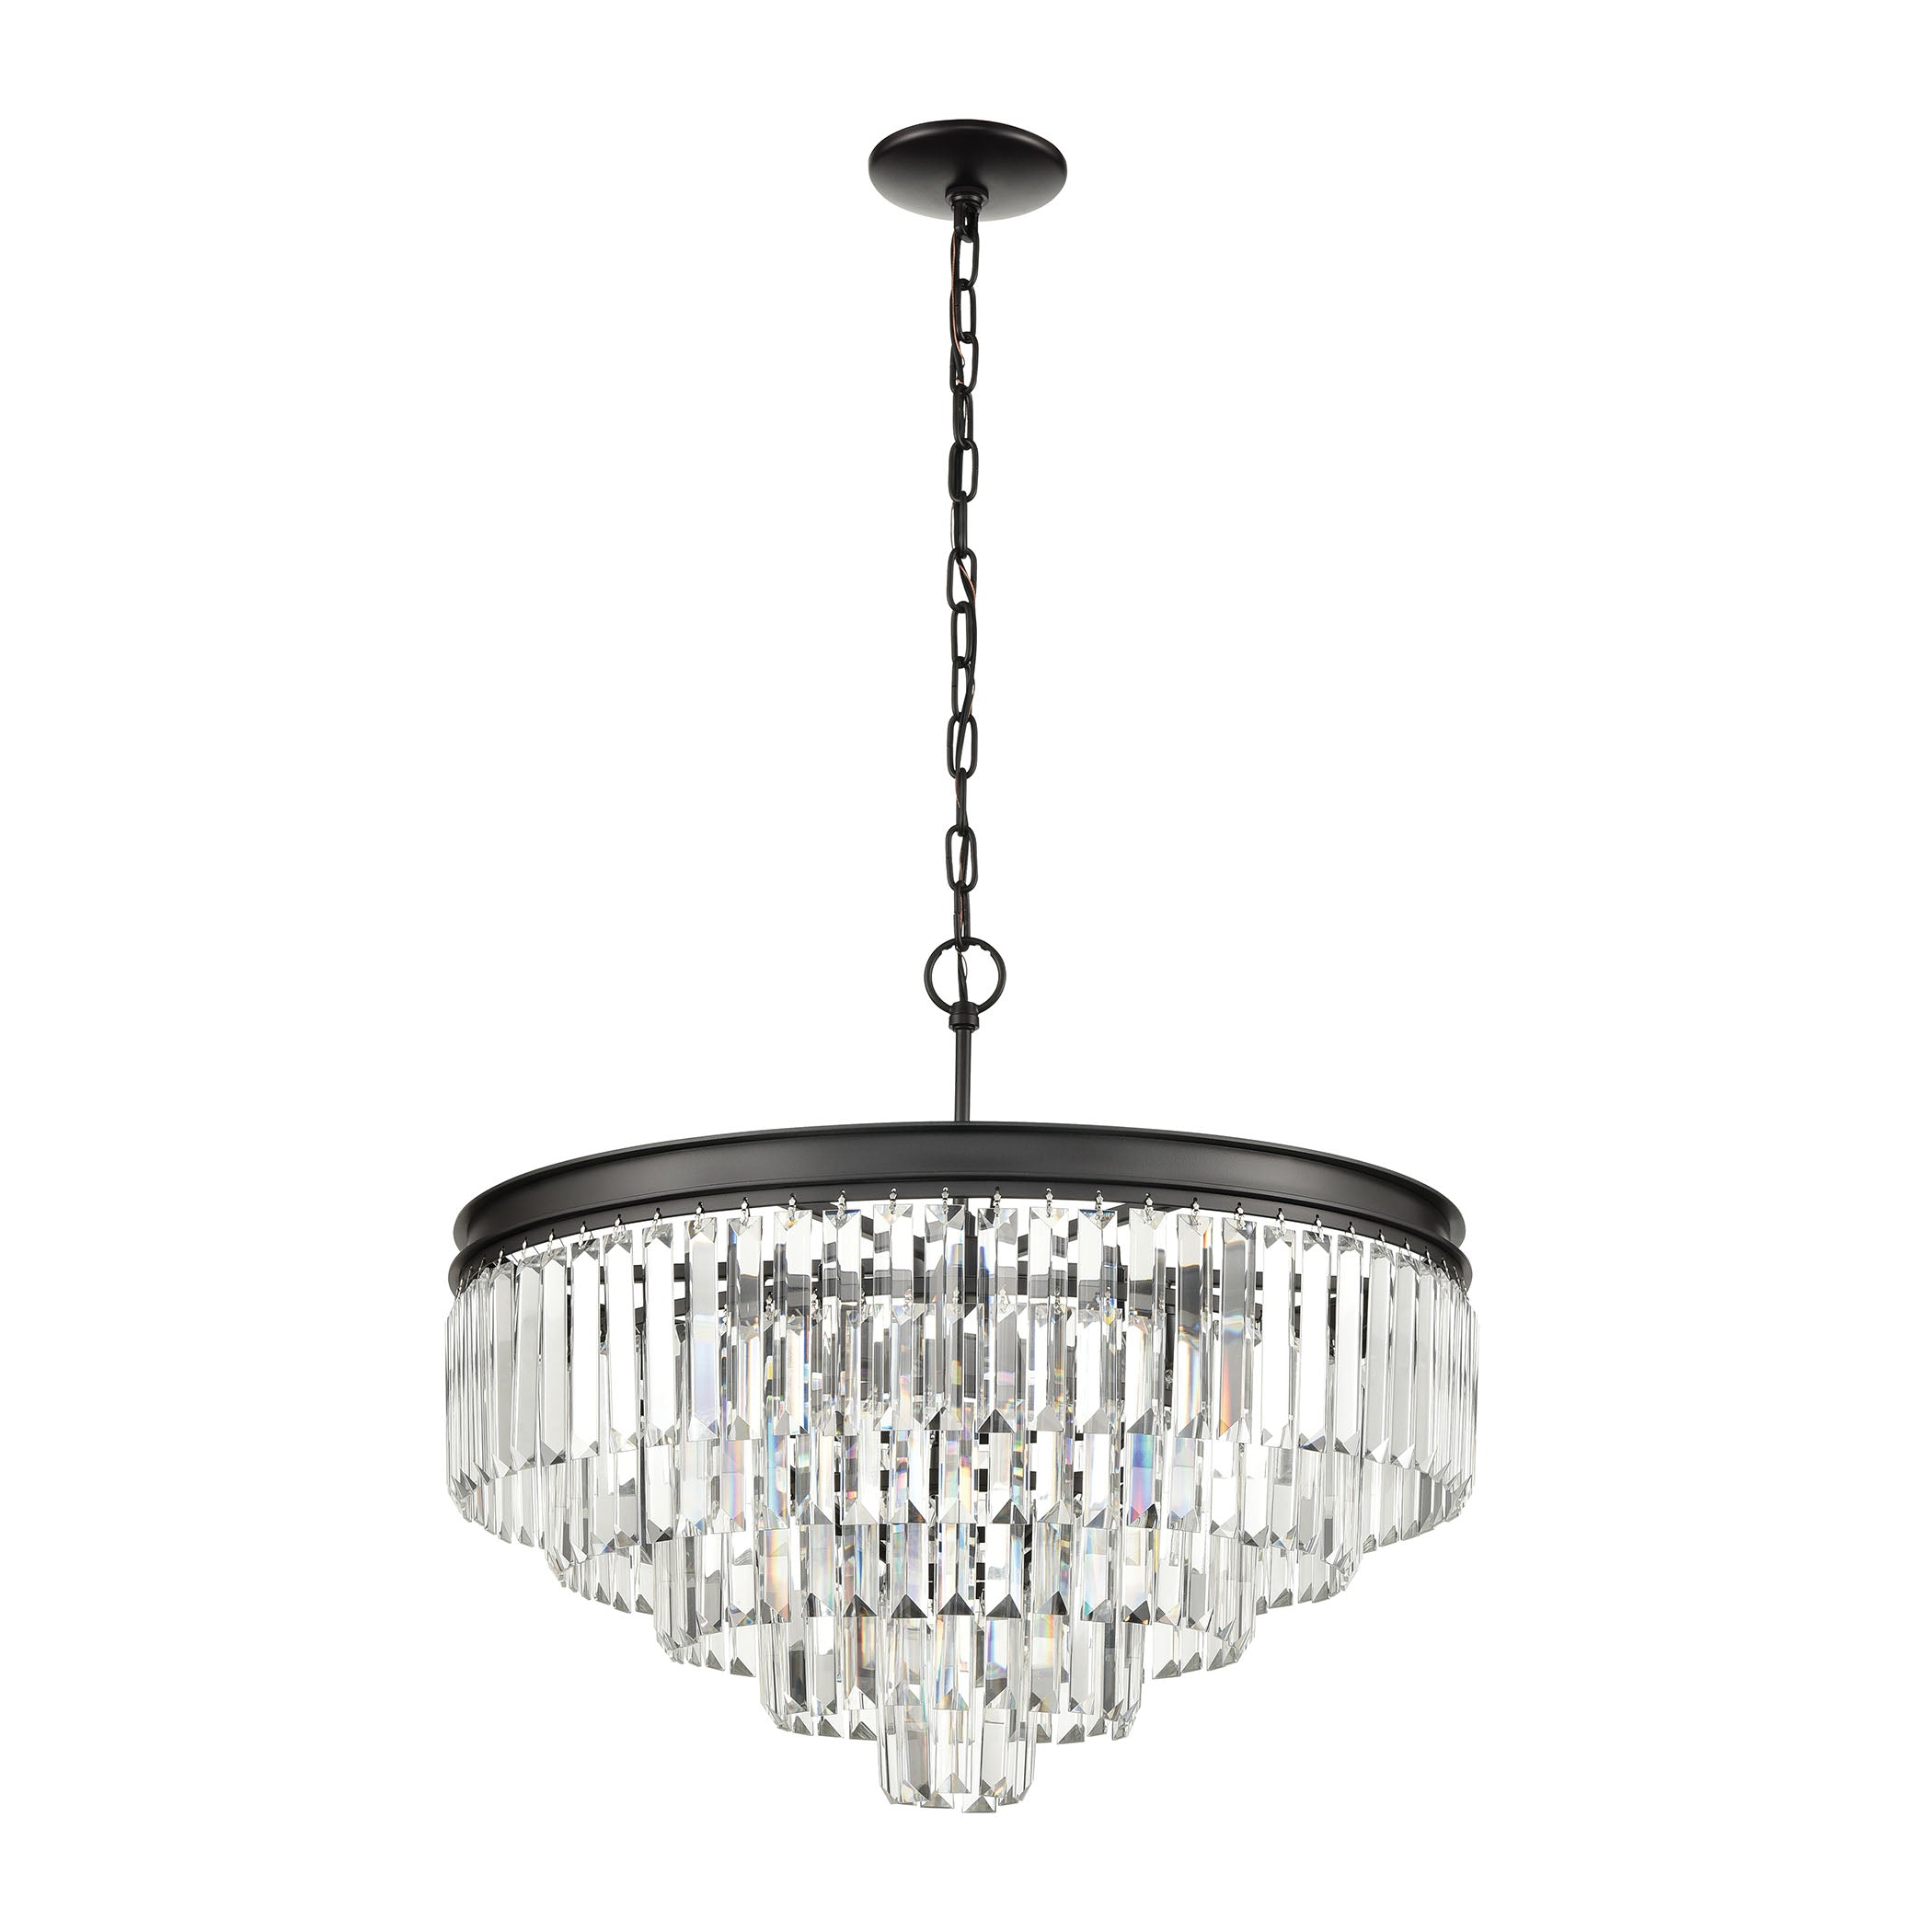 ELK Lighting 14214/5+1 Palacial 5+1-Light Chandelier in Oil Rubbed Bronze with Clear Crystal